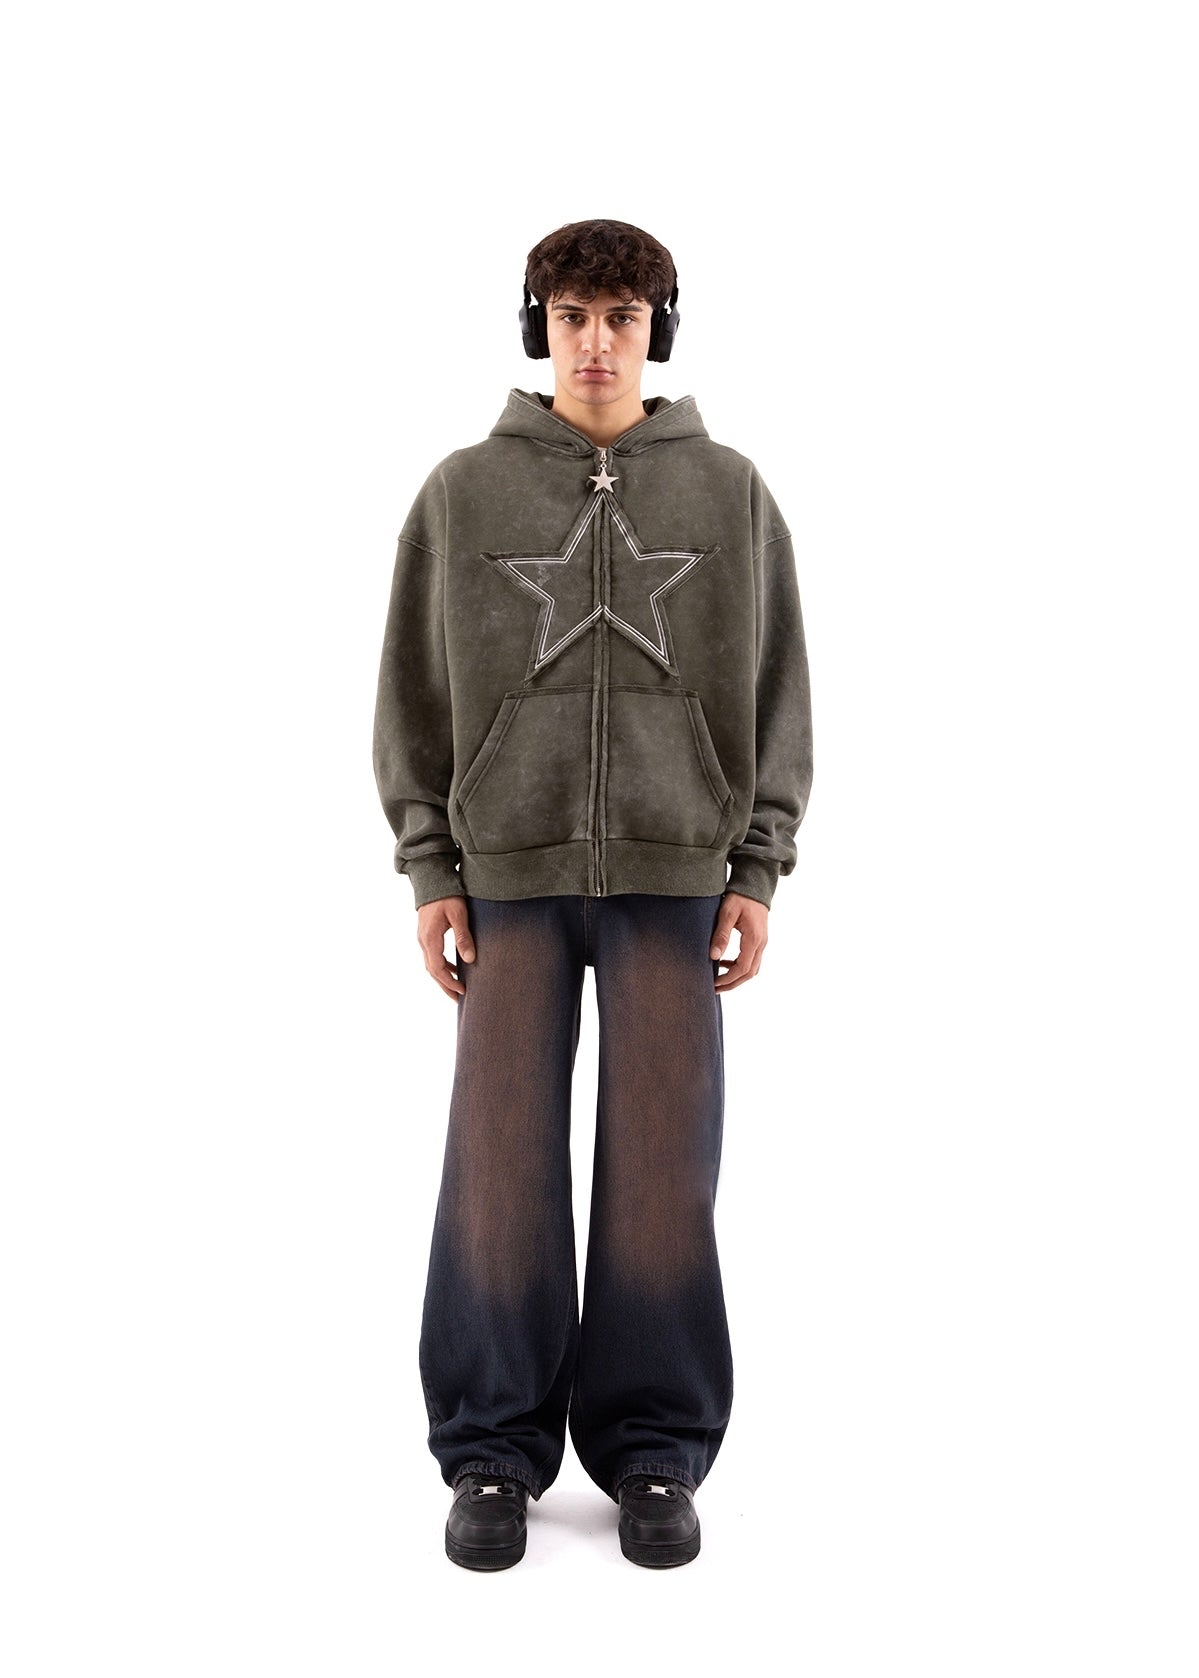 Faded Brown Baggy Pockets Jeans - Clothing Lab